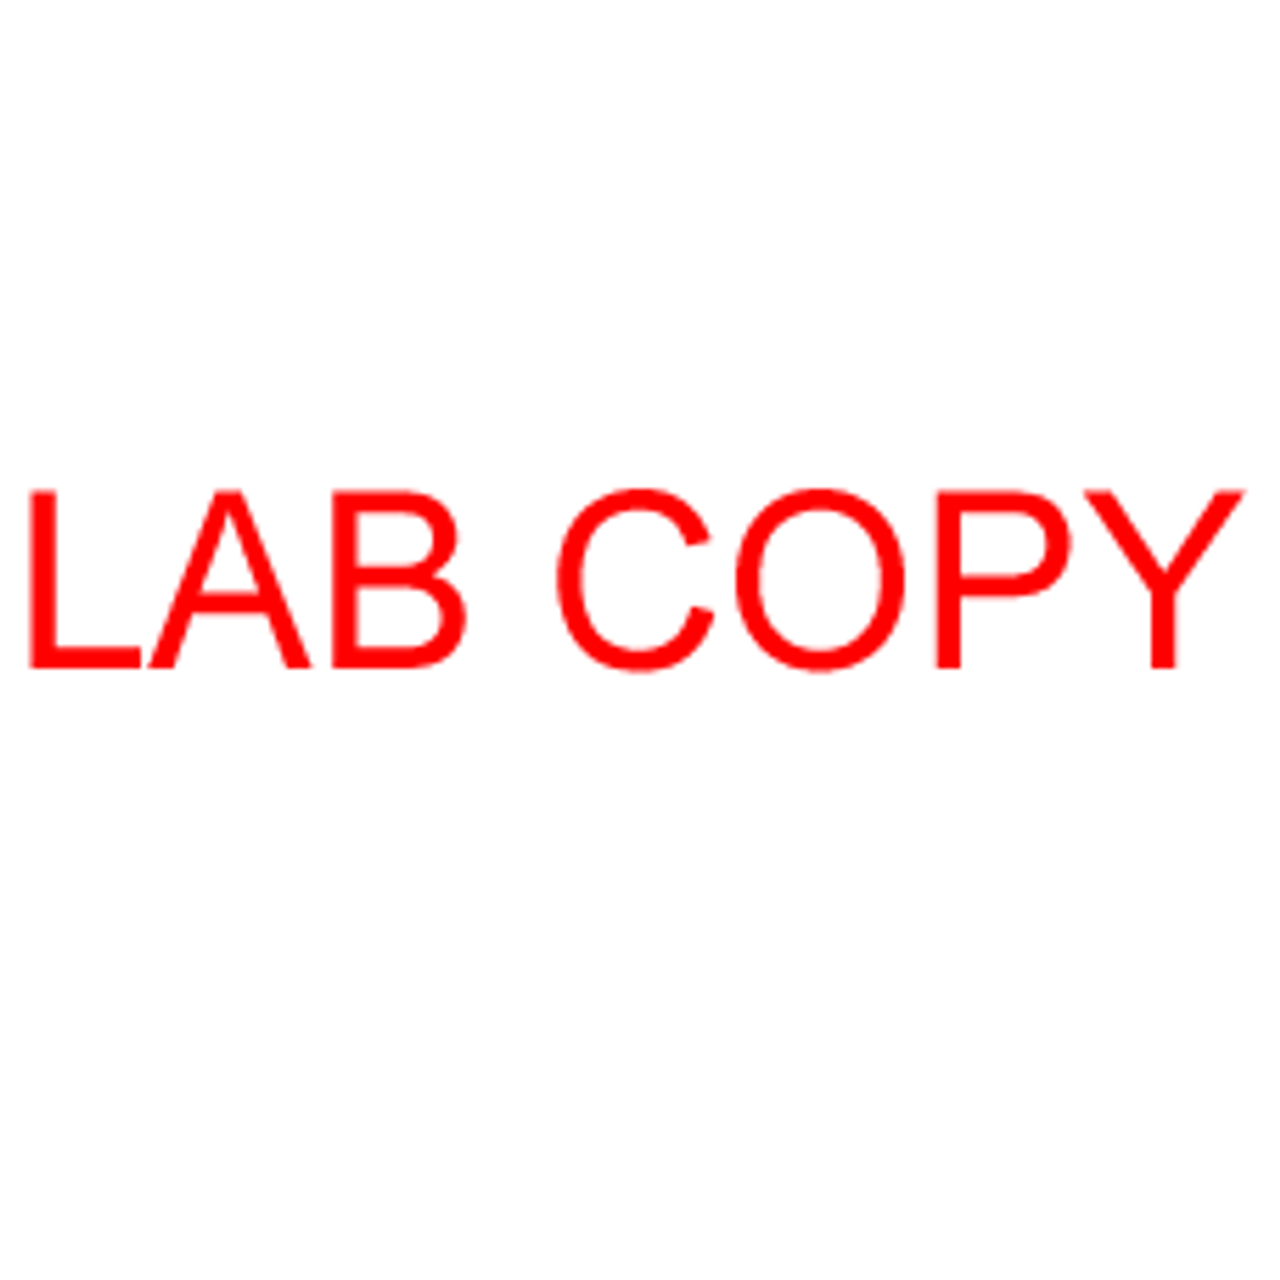 LAB COPY Rubber Stamp for office use self-inking